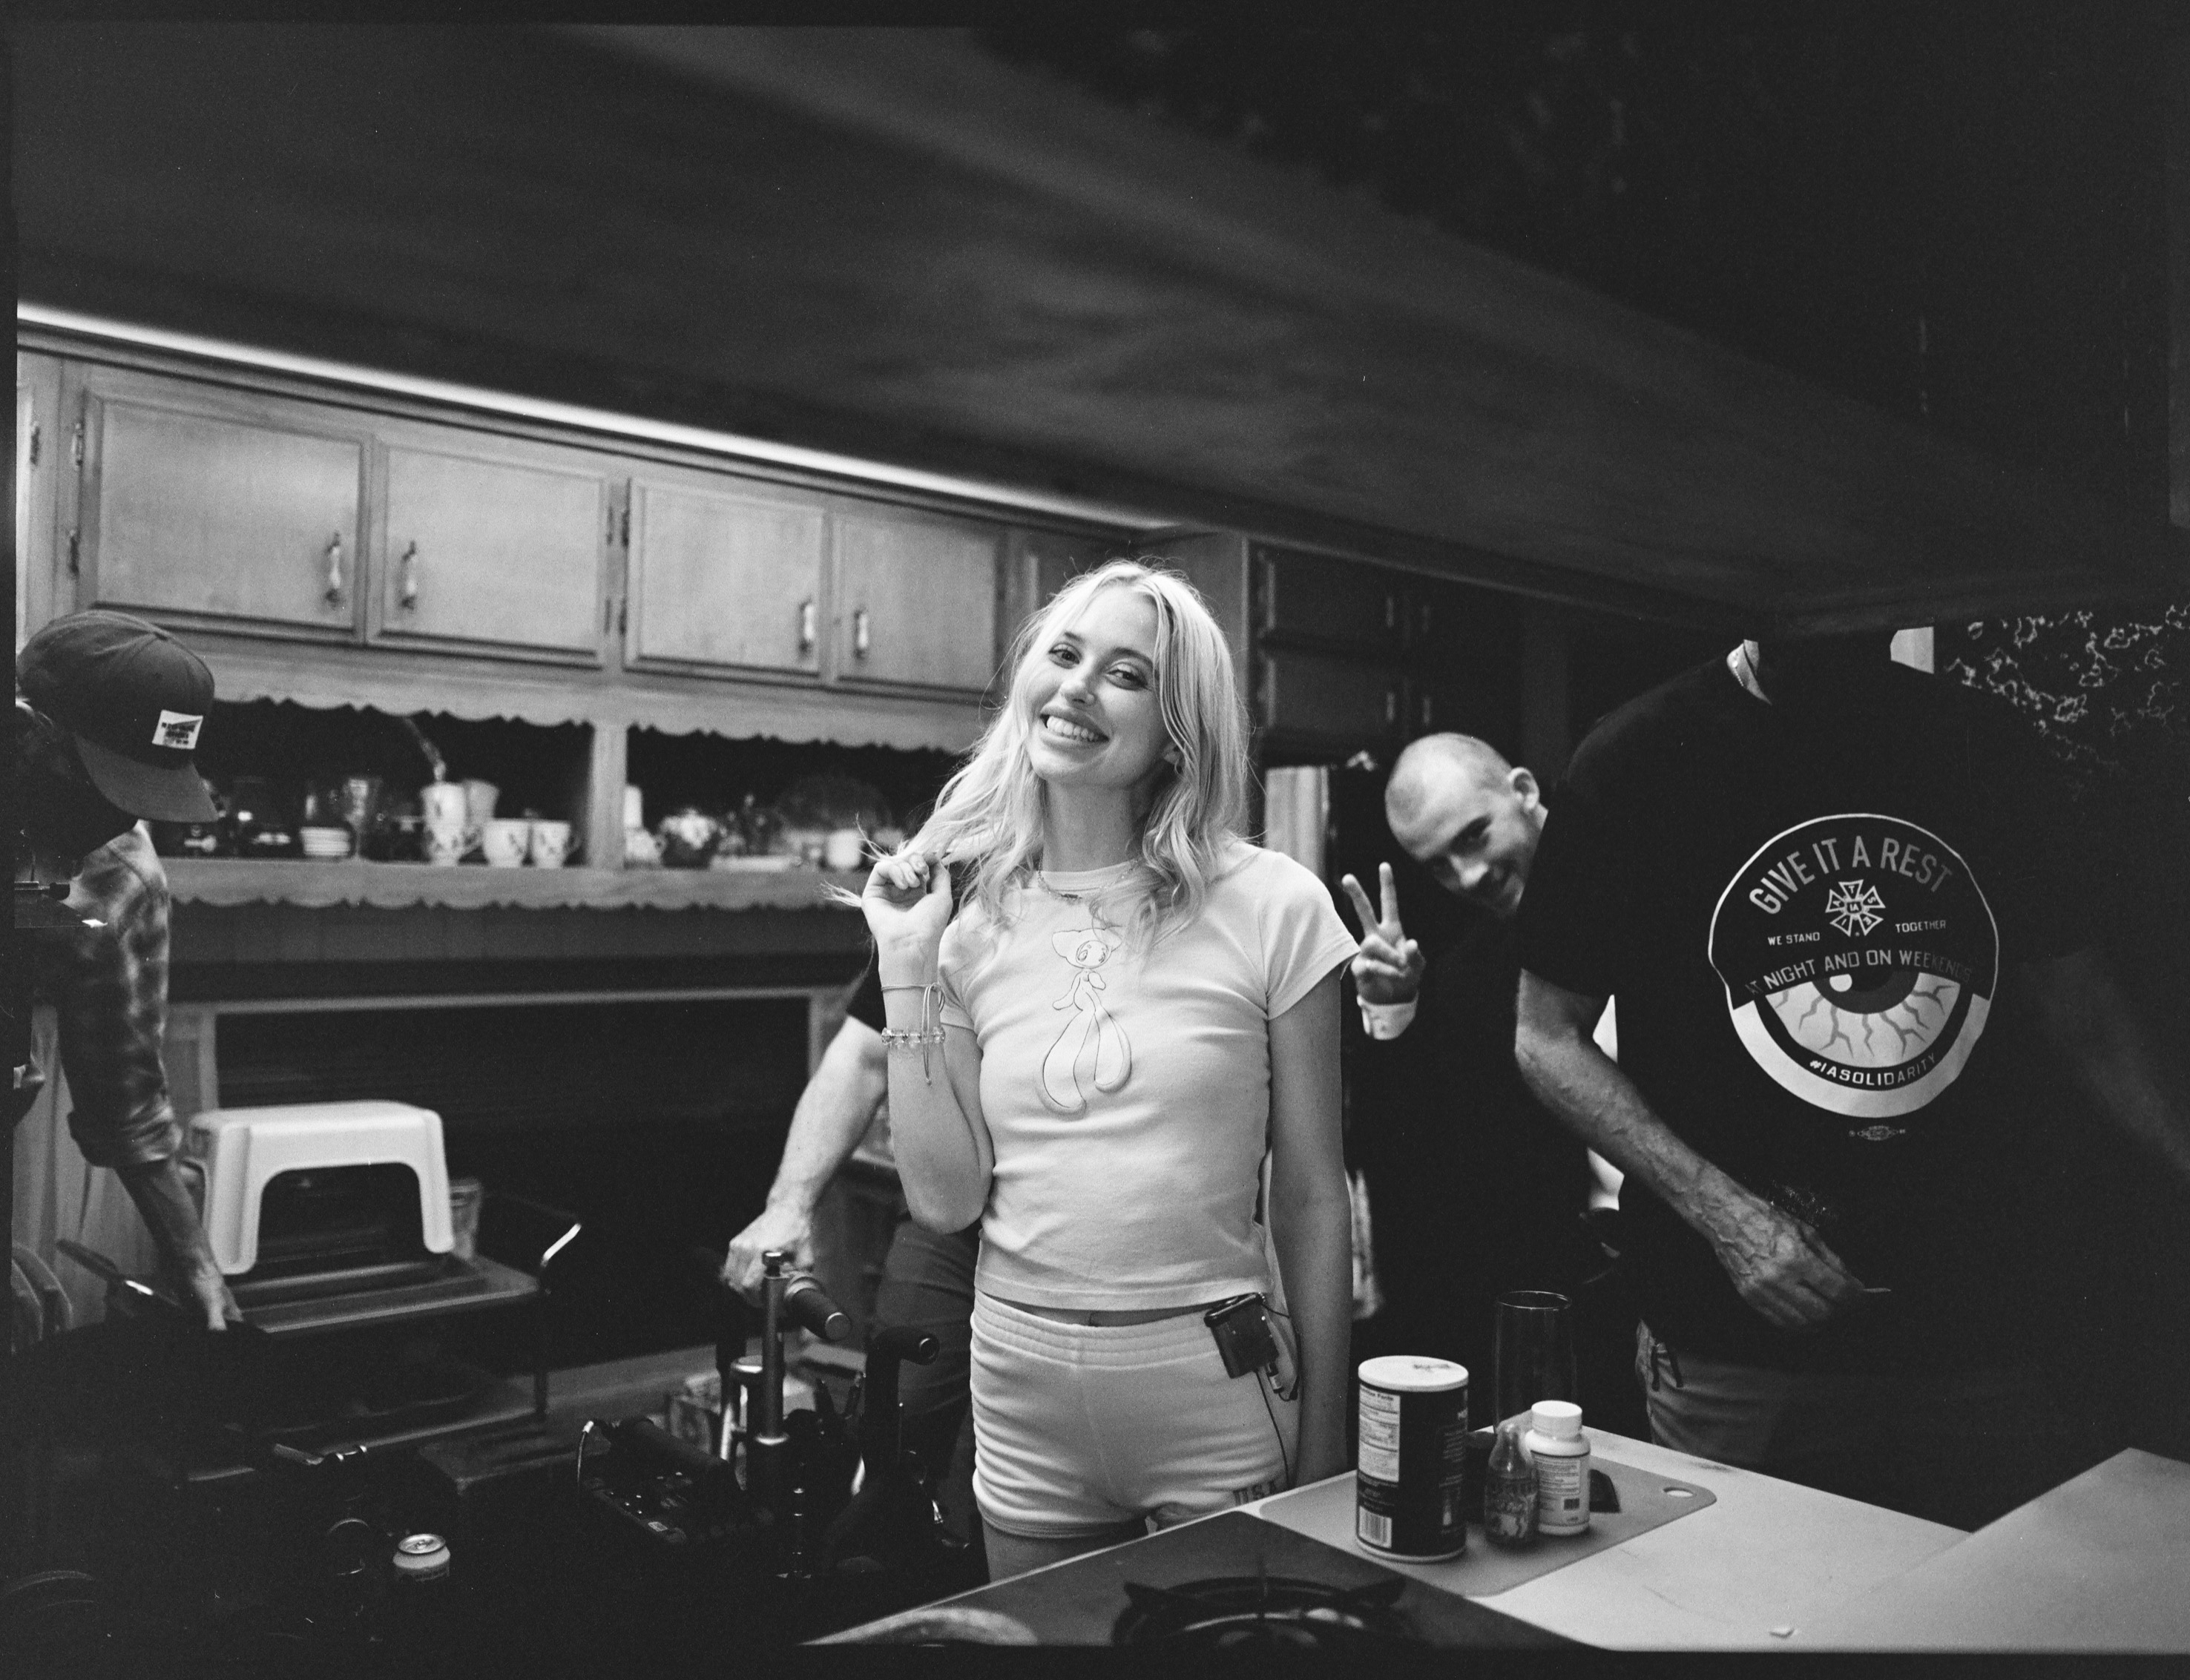 Black and white image of Chloe Cherry behind the scenes of the Euphoria set